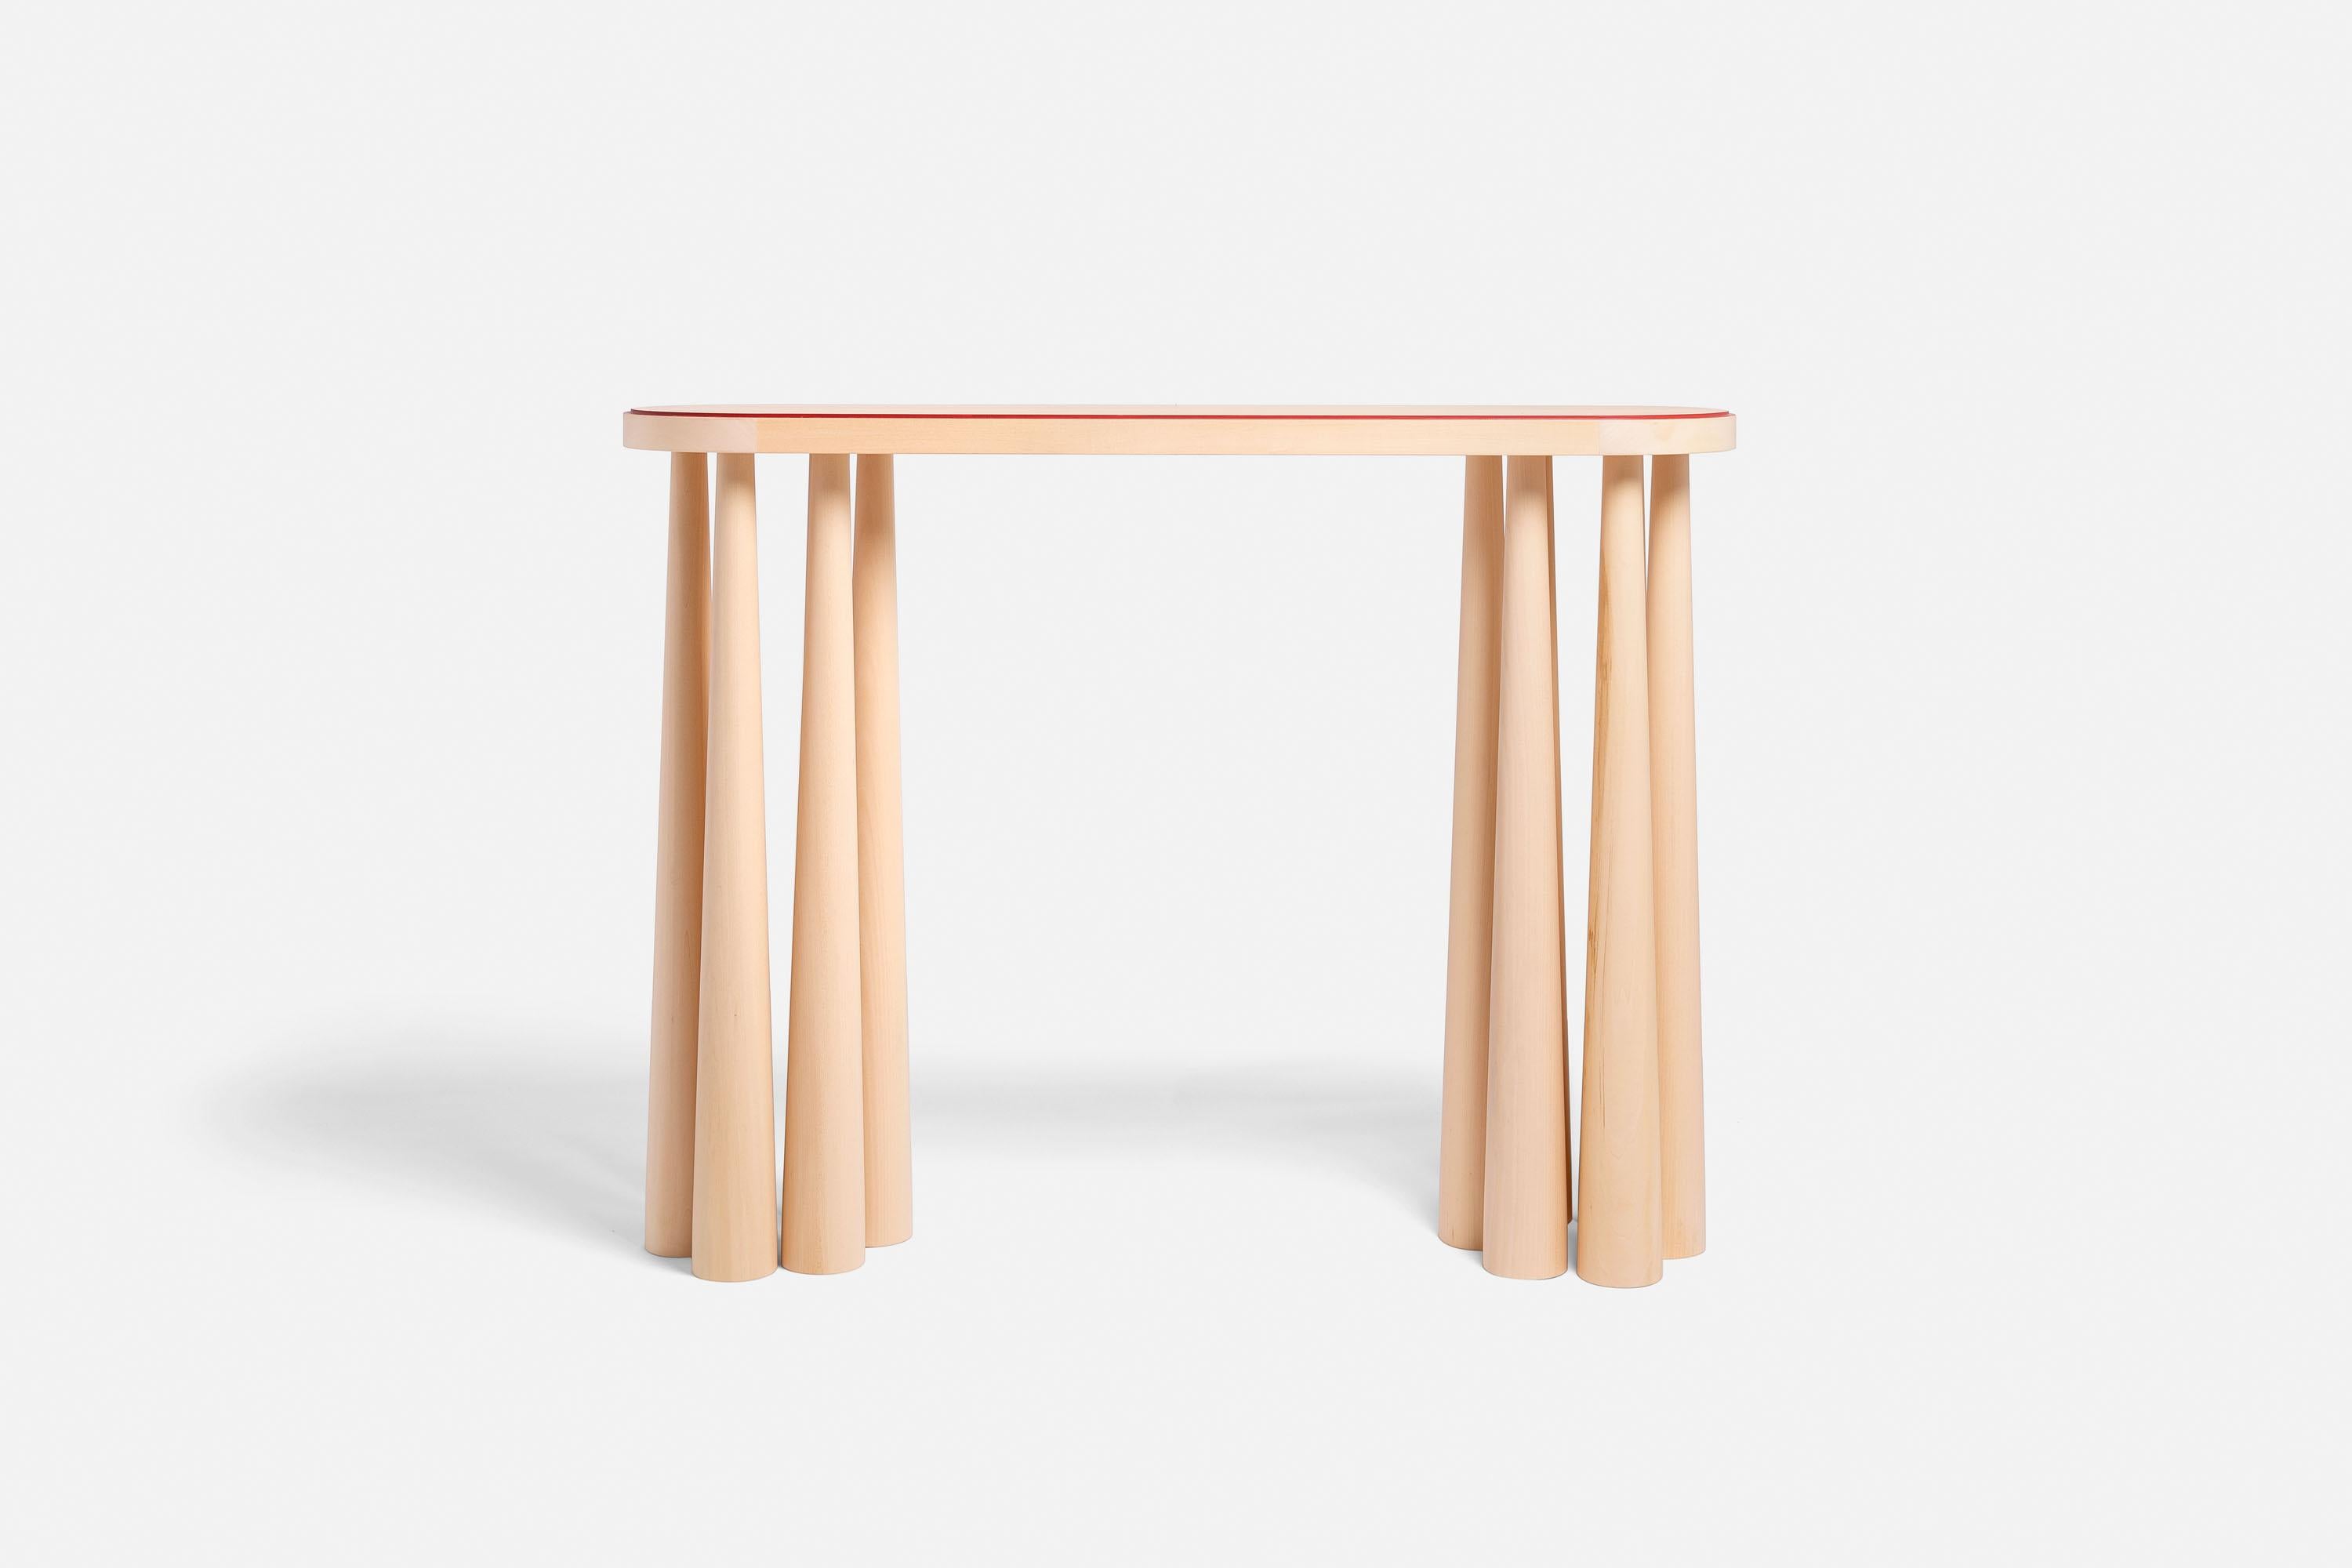 Bogdan console table by Studio Intervallo
Dimensions: W 120 x D 34 x H 91 cm
Materials: LINDEN solid wood, with colored decoration on the circumference.

Other types of wood available on request.

The Bogdan collection is born from a single